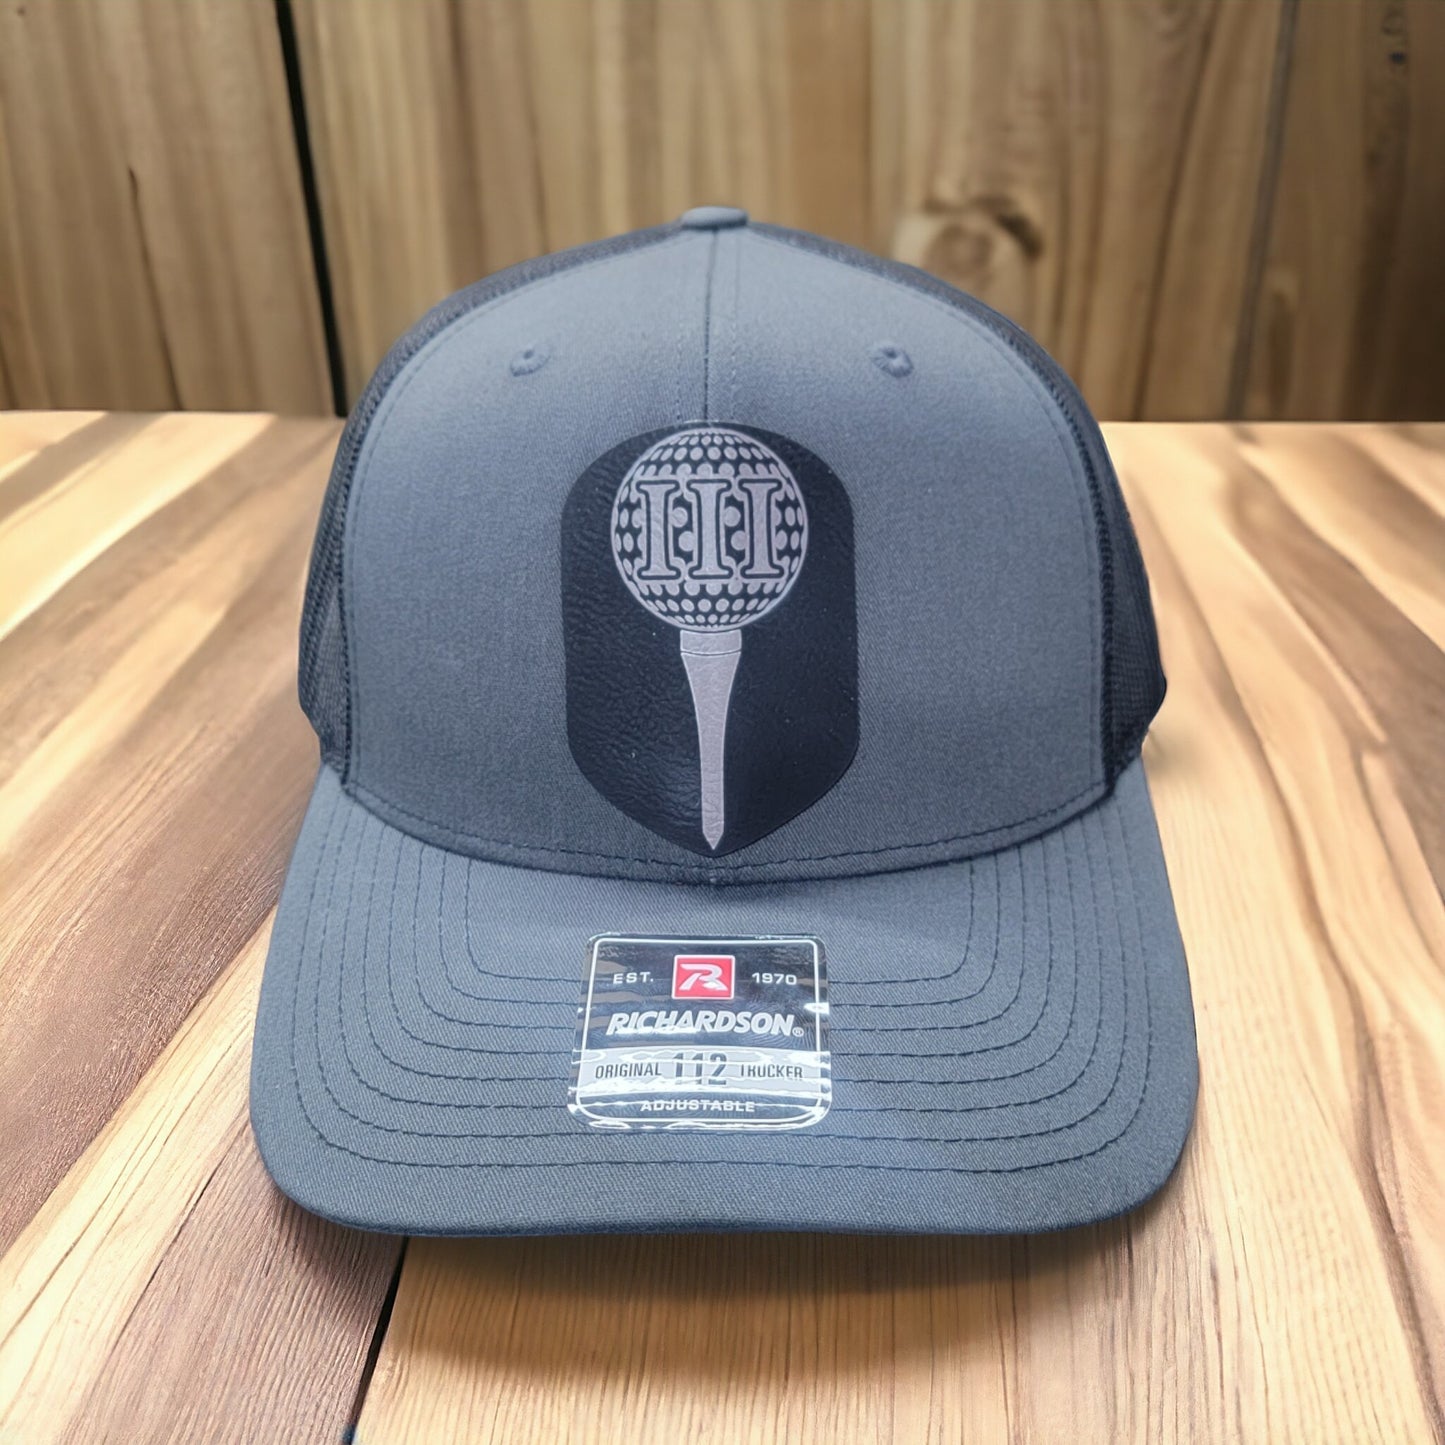 "3 Off The Tee" Golf Hat